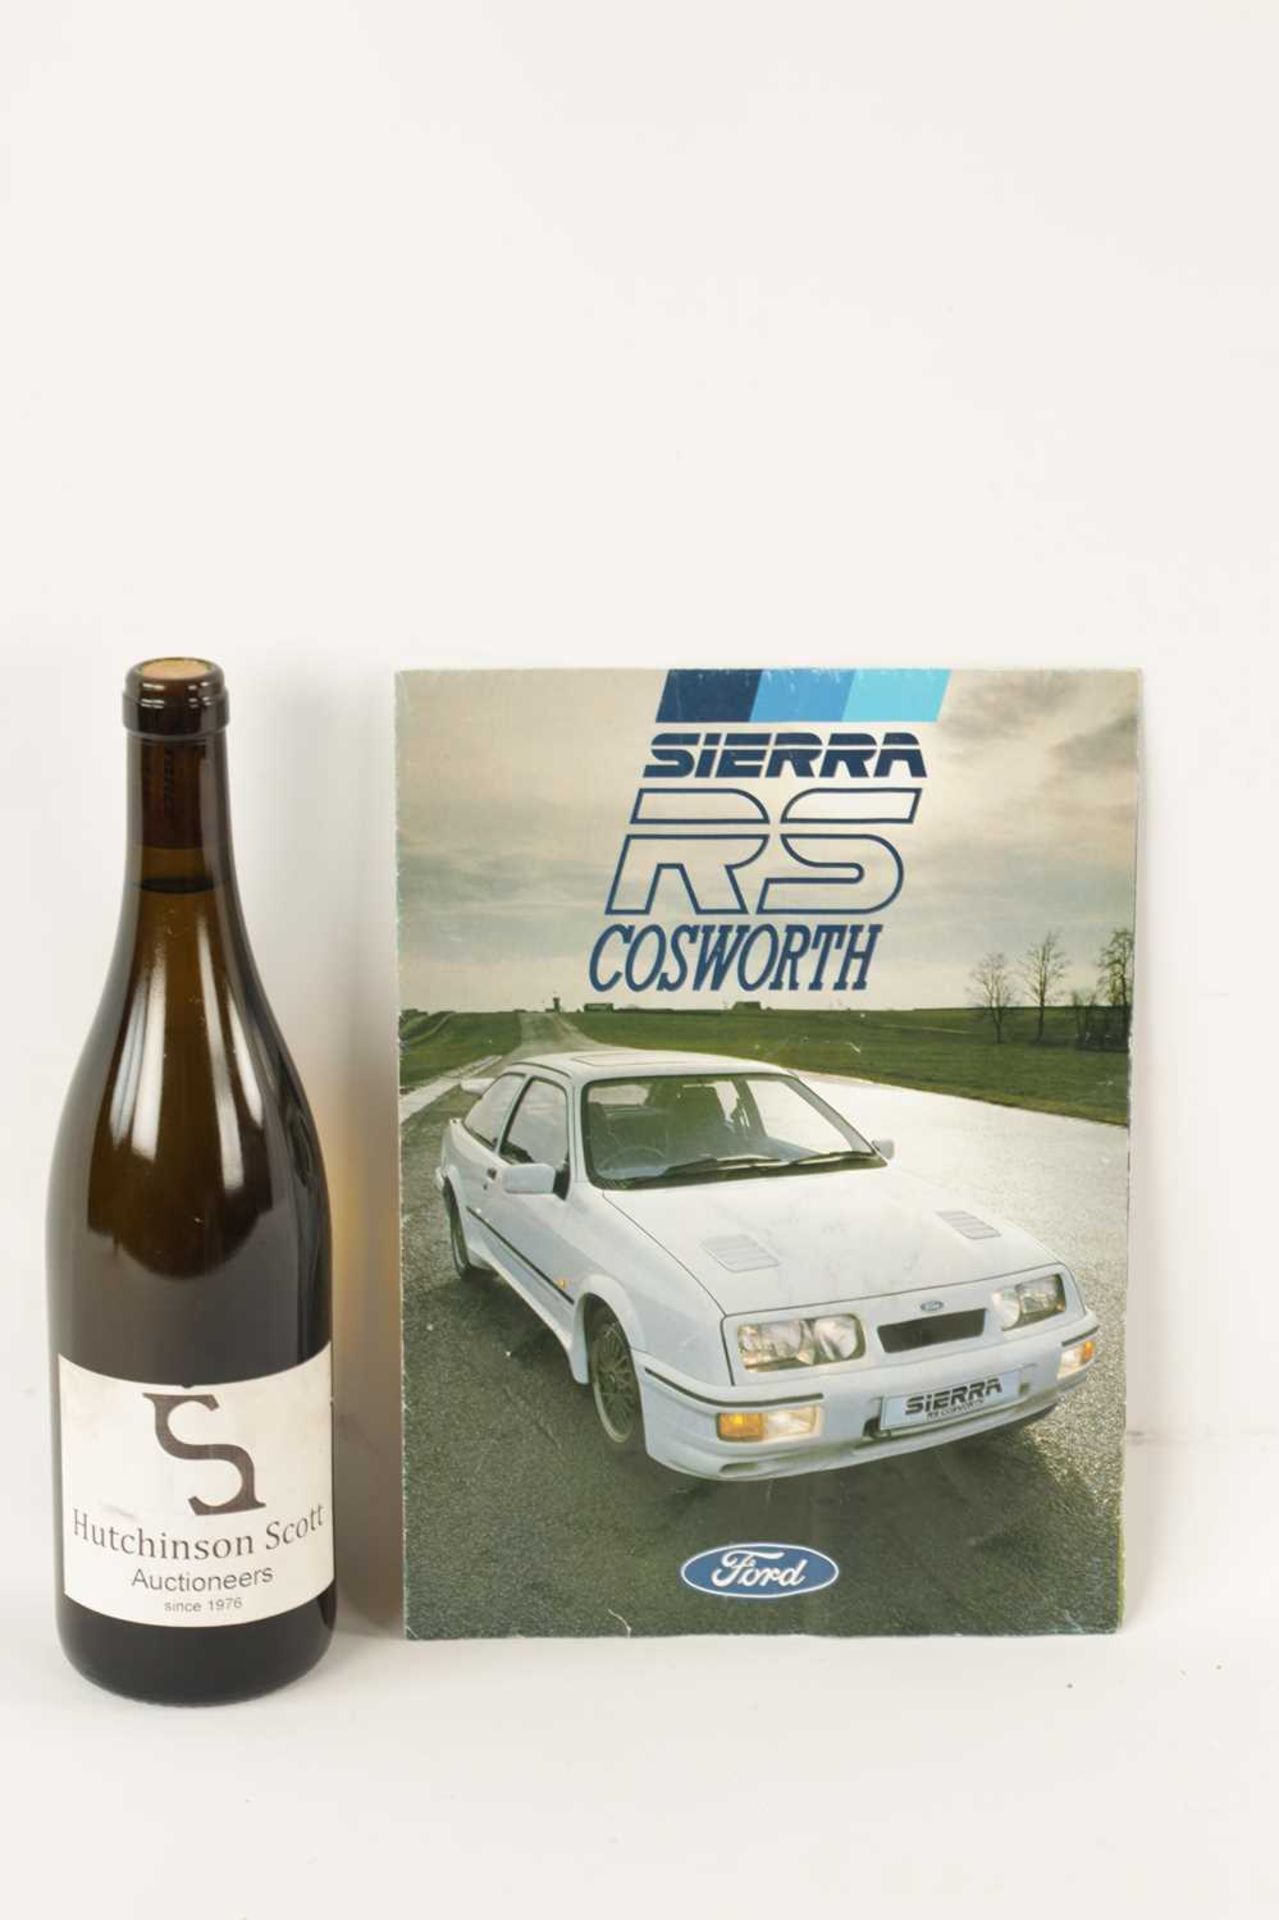 AN ORIGINAL FORD SIERRA RS COSWORTH VEHICLE SALES BROCHURE - Image 2 of 5